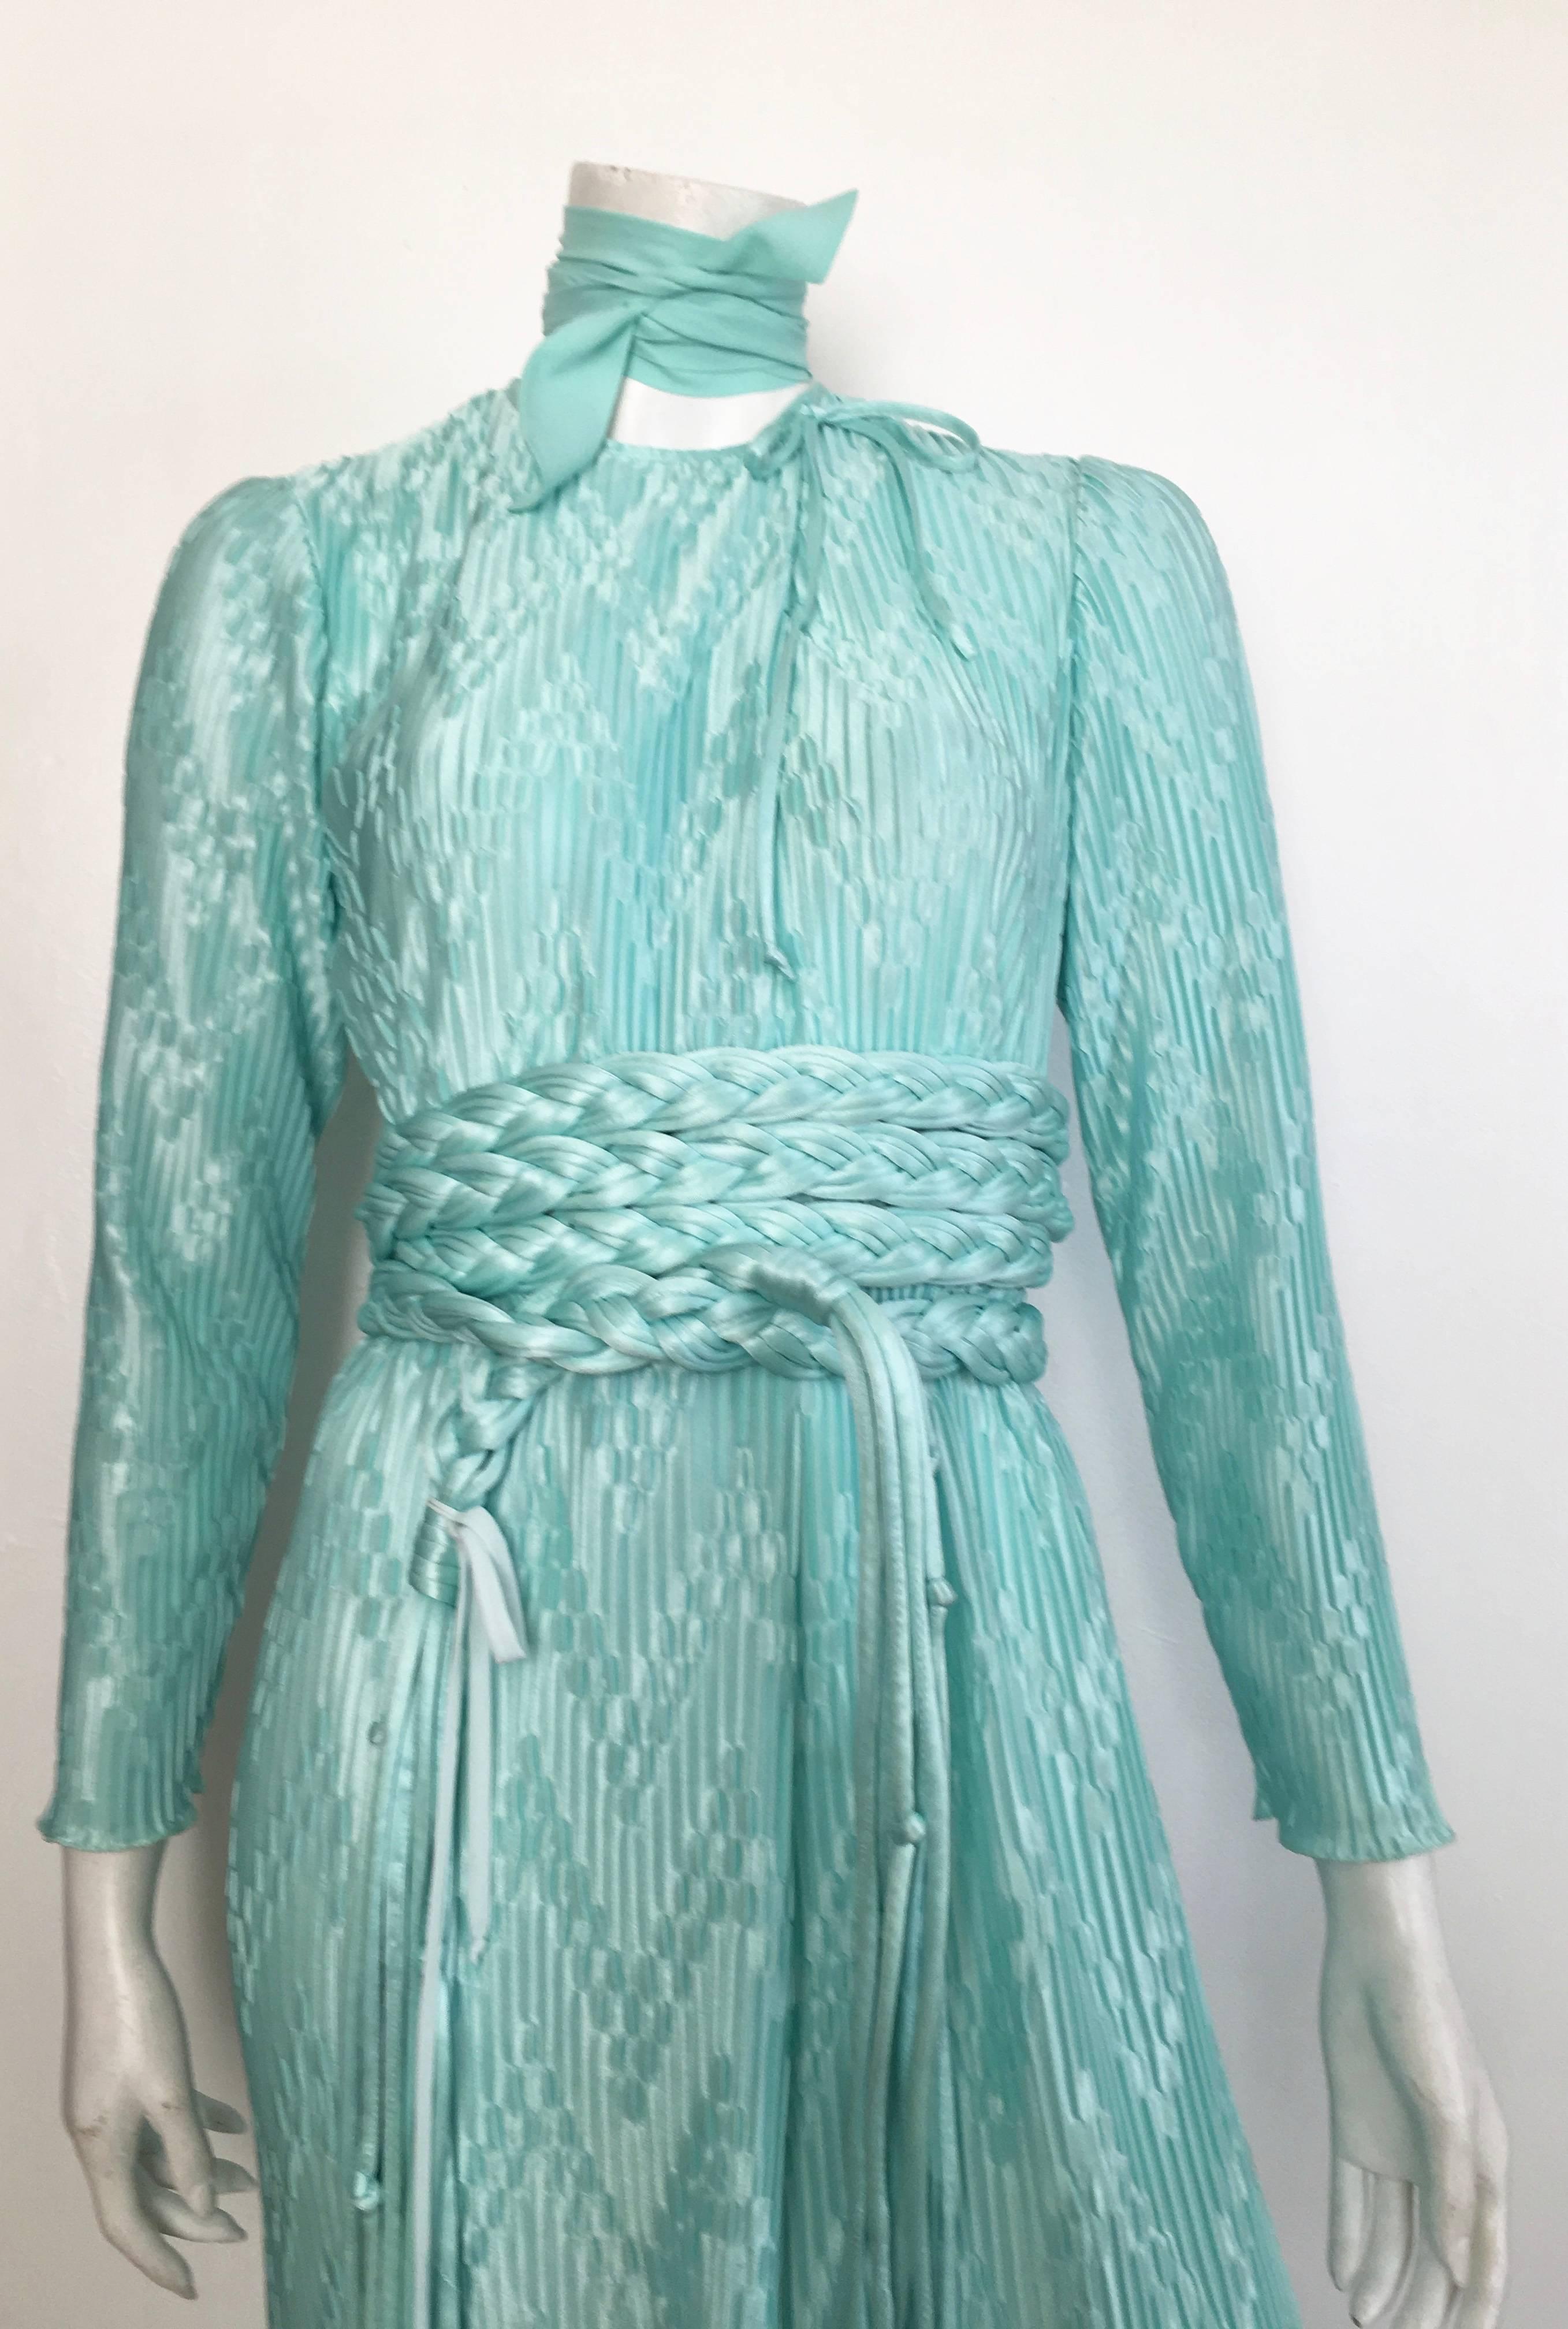 Mary McFadden for Bonwit Teller 1970s aqua maxi dress with braided fringe belt is labeled a size small but ideally a size 6 would be perfect.  This dress was designed to be oversized and flowing, not tailored fit. Not only is the aqua color stunning